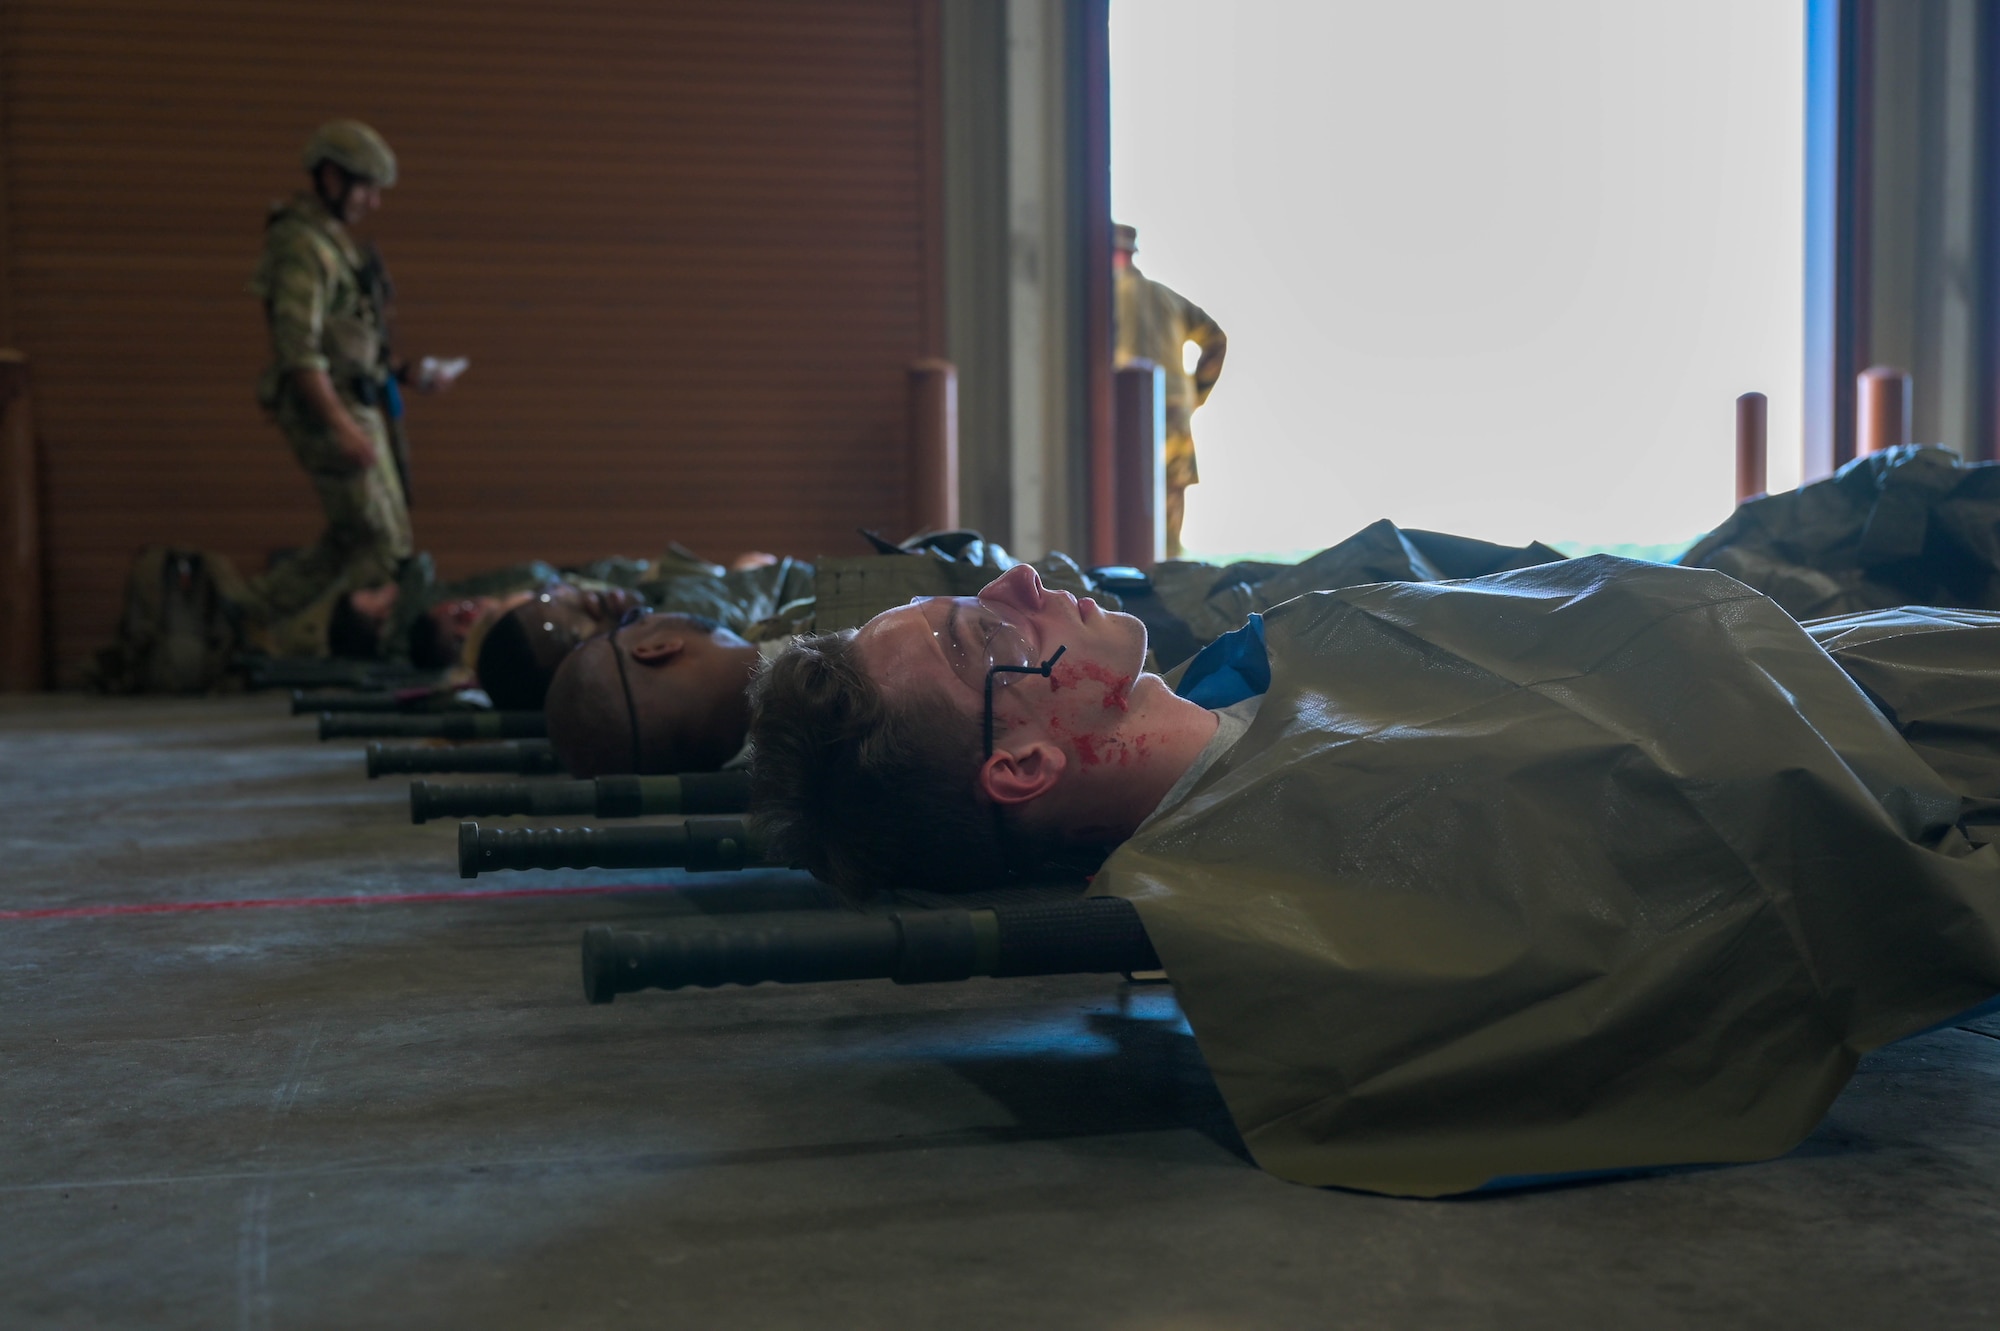 Members of the 920th Rescue Wing participate in the exercise Fury Horizon 23 at Avon Park Air Force Range, Florida, Sept. 8, 2023.